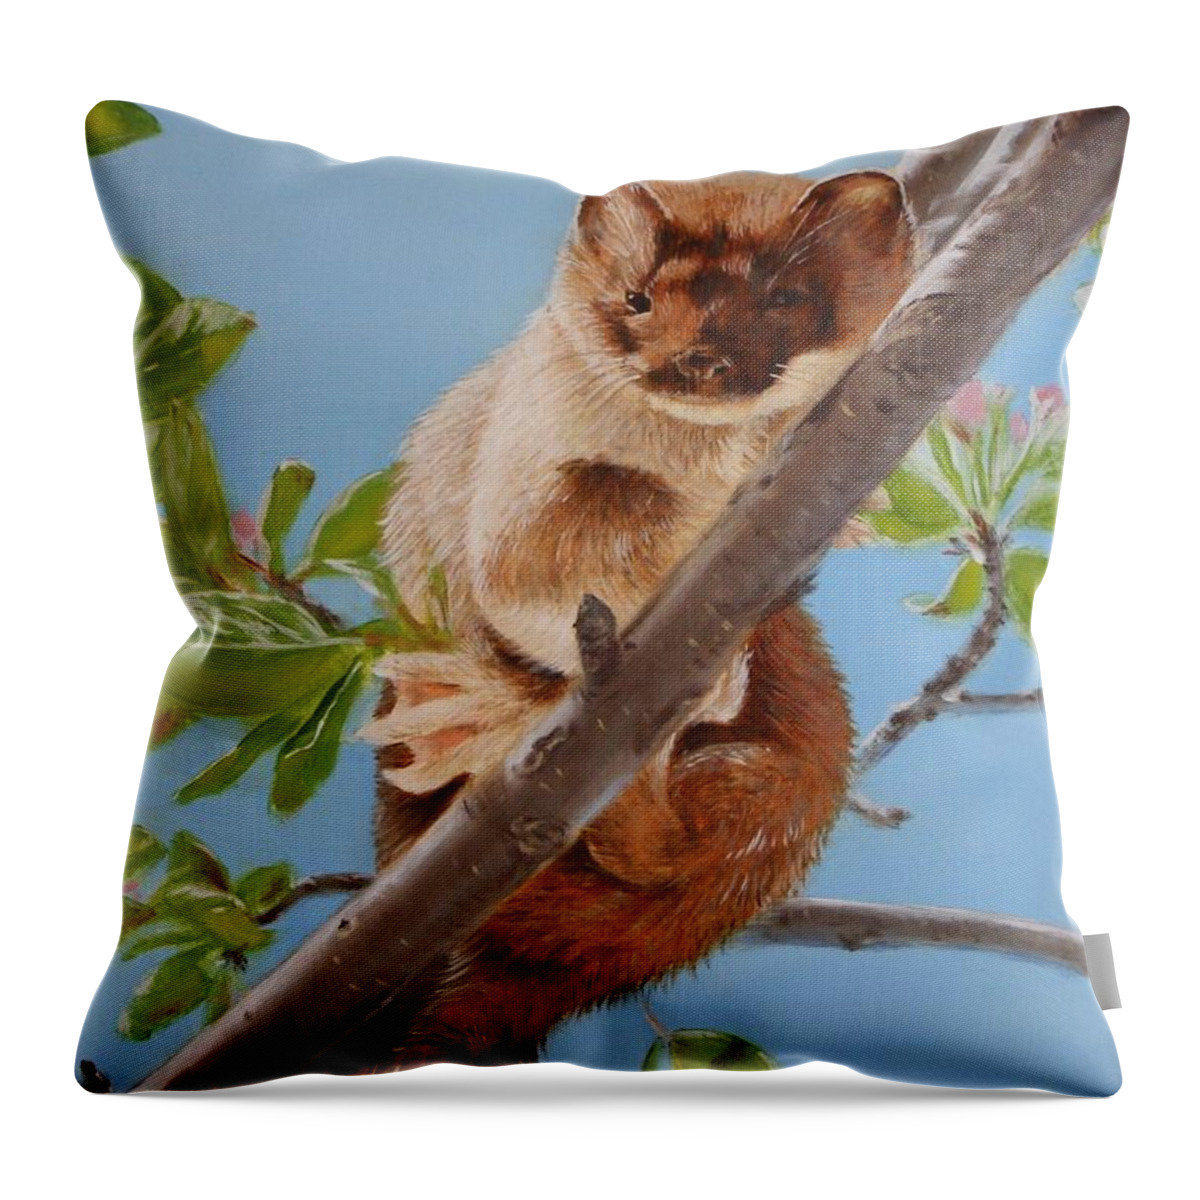 Weasel Throw Pillow featuring the painting The Weasel by Tammy Taylor